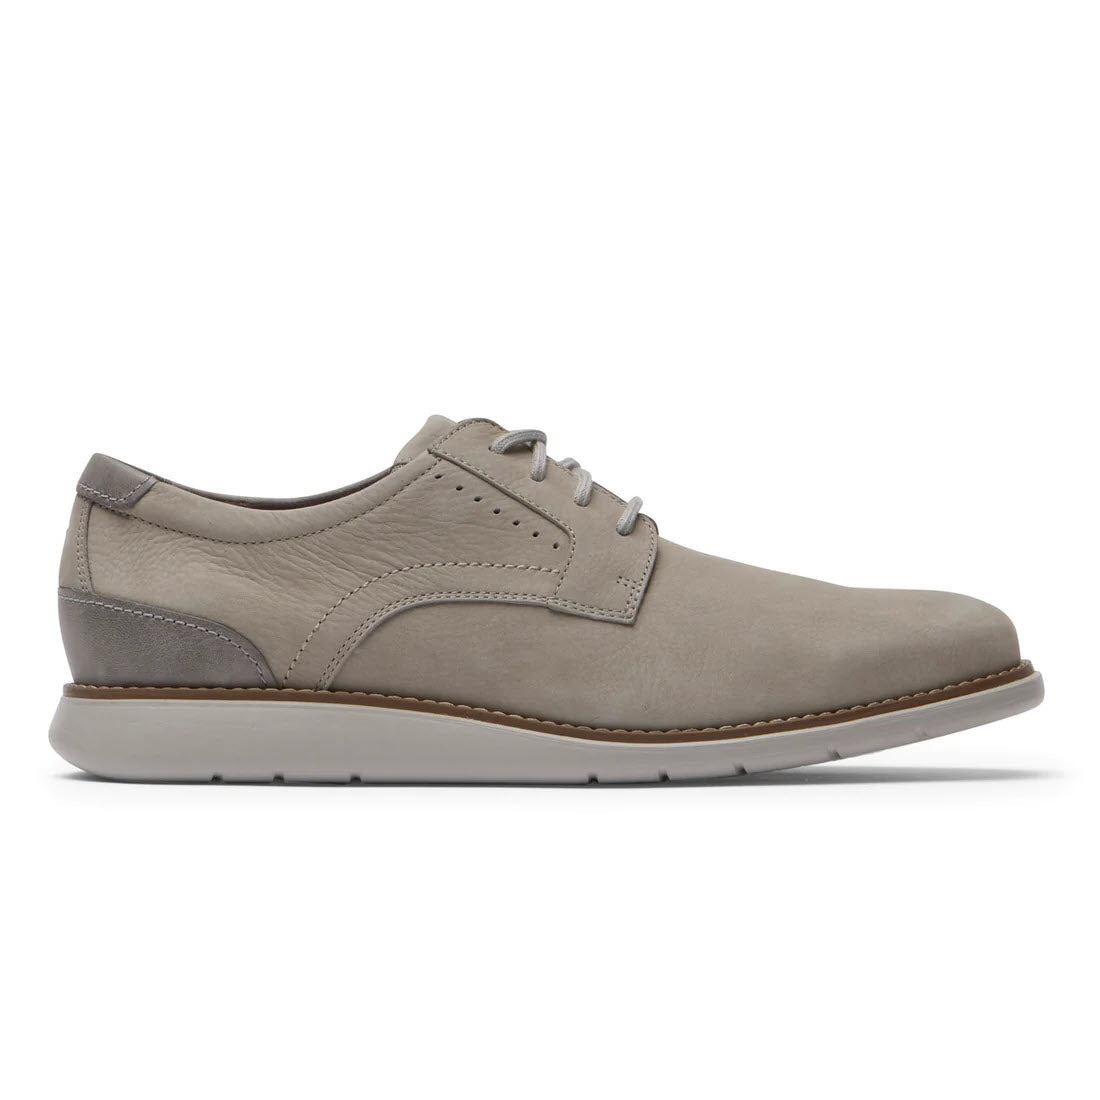 A single grey men&#39;s Rockport Total Motion Craft Plain Toe Taupe oxford shoe with lace-up closure, featuring stitching details and a light brown IMEVA sole.